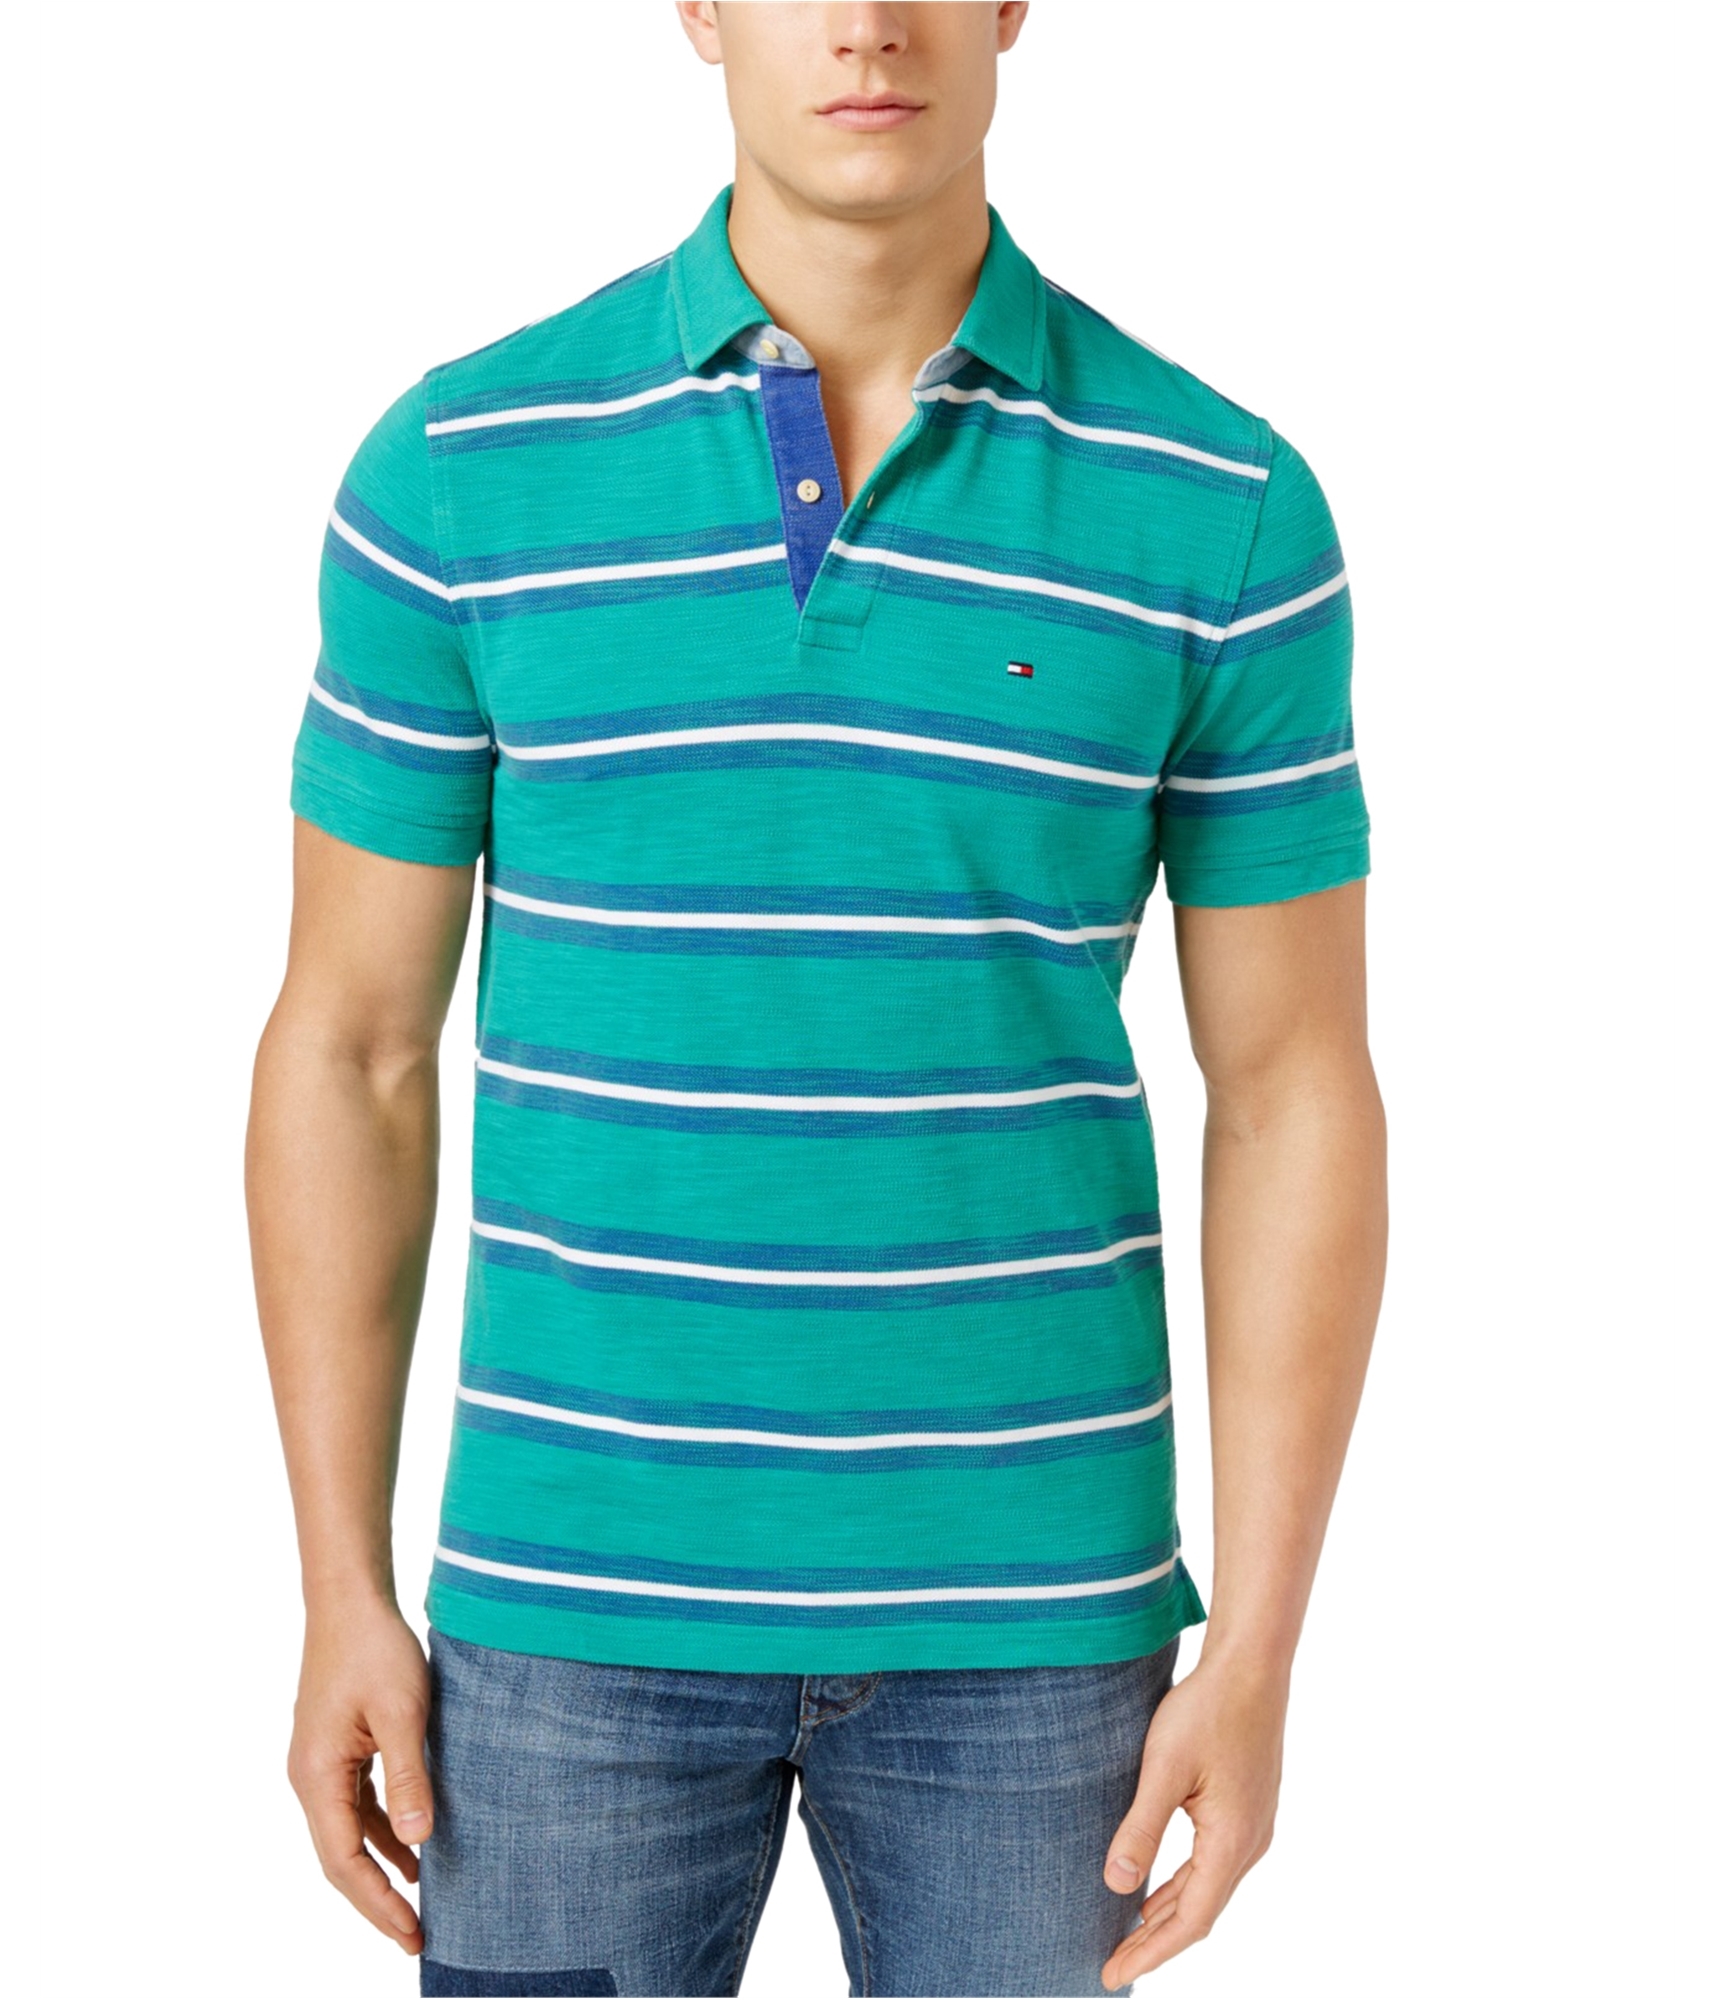 Buy a Tommy Hilfiger Mens Marino Rugby Polo Shirt | Tagsweekly